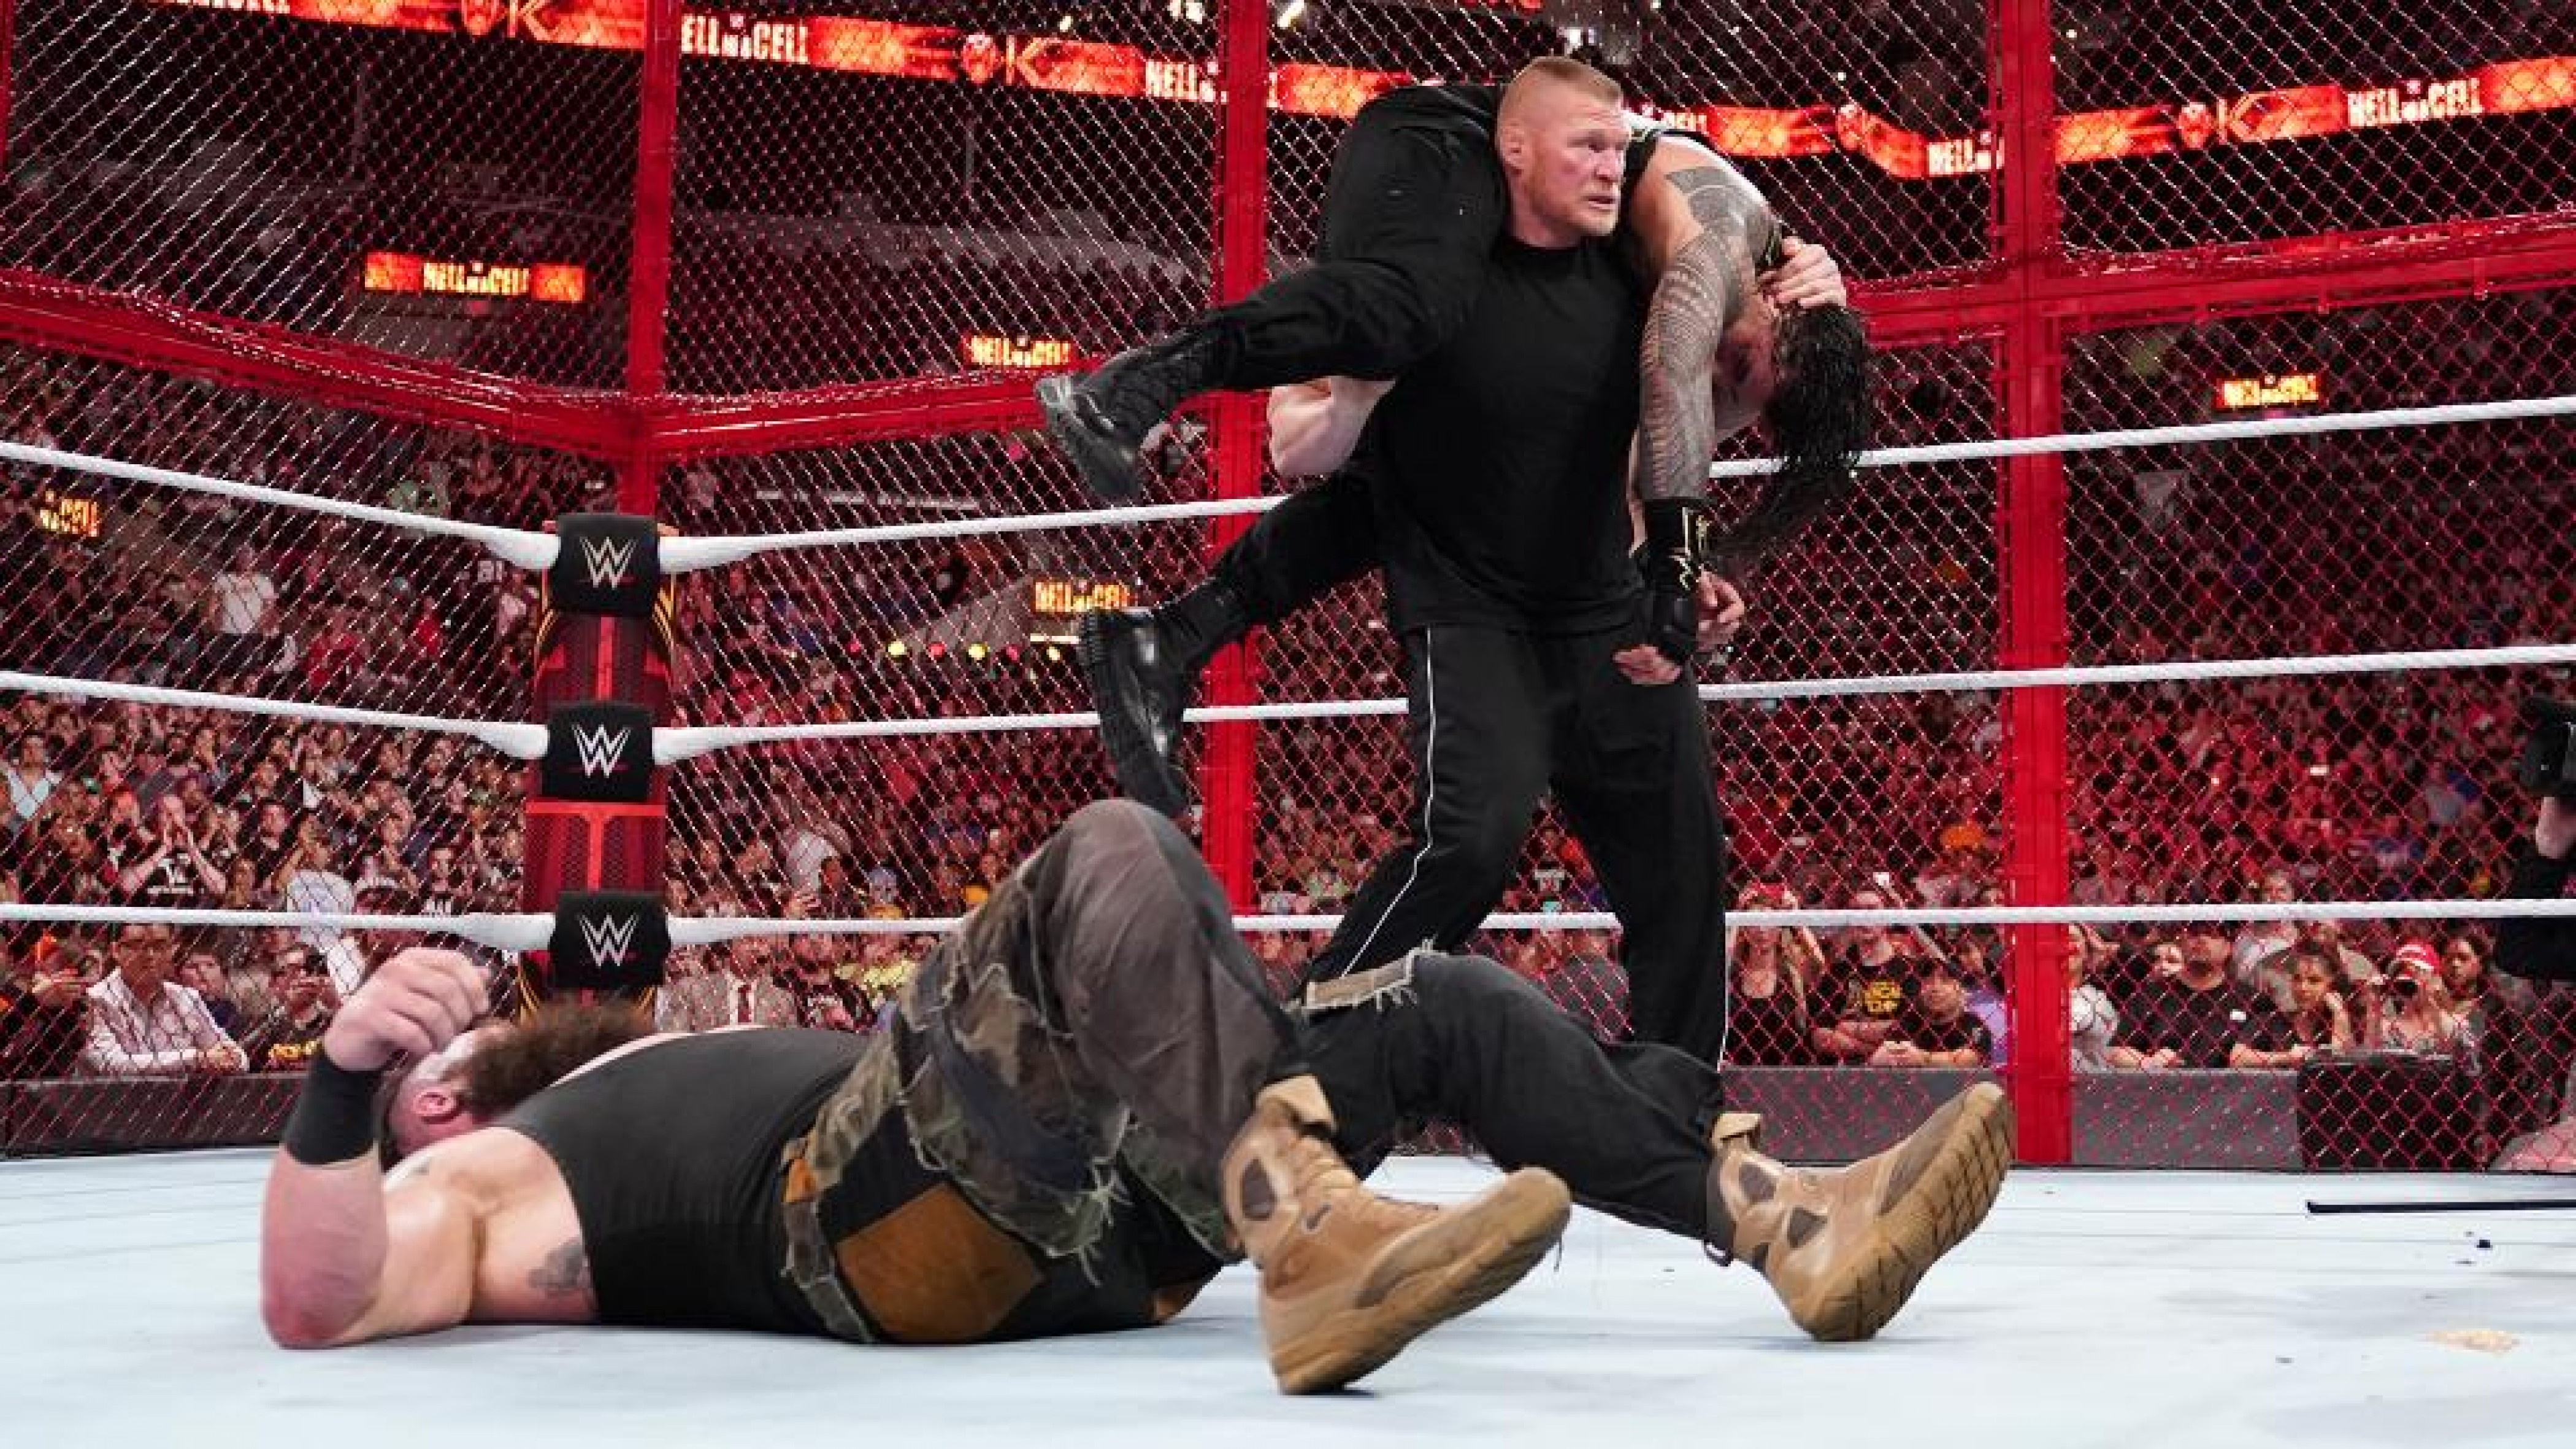 Wwe Hell In A Cell 2018 Recap And Results September 16 2018